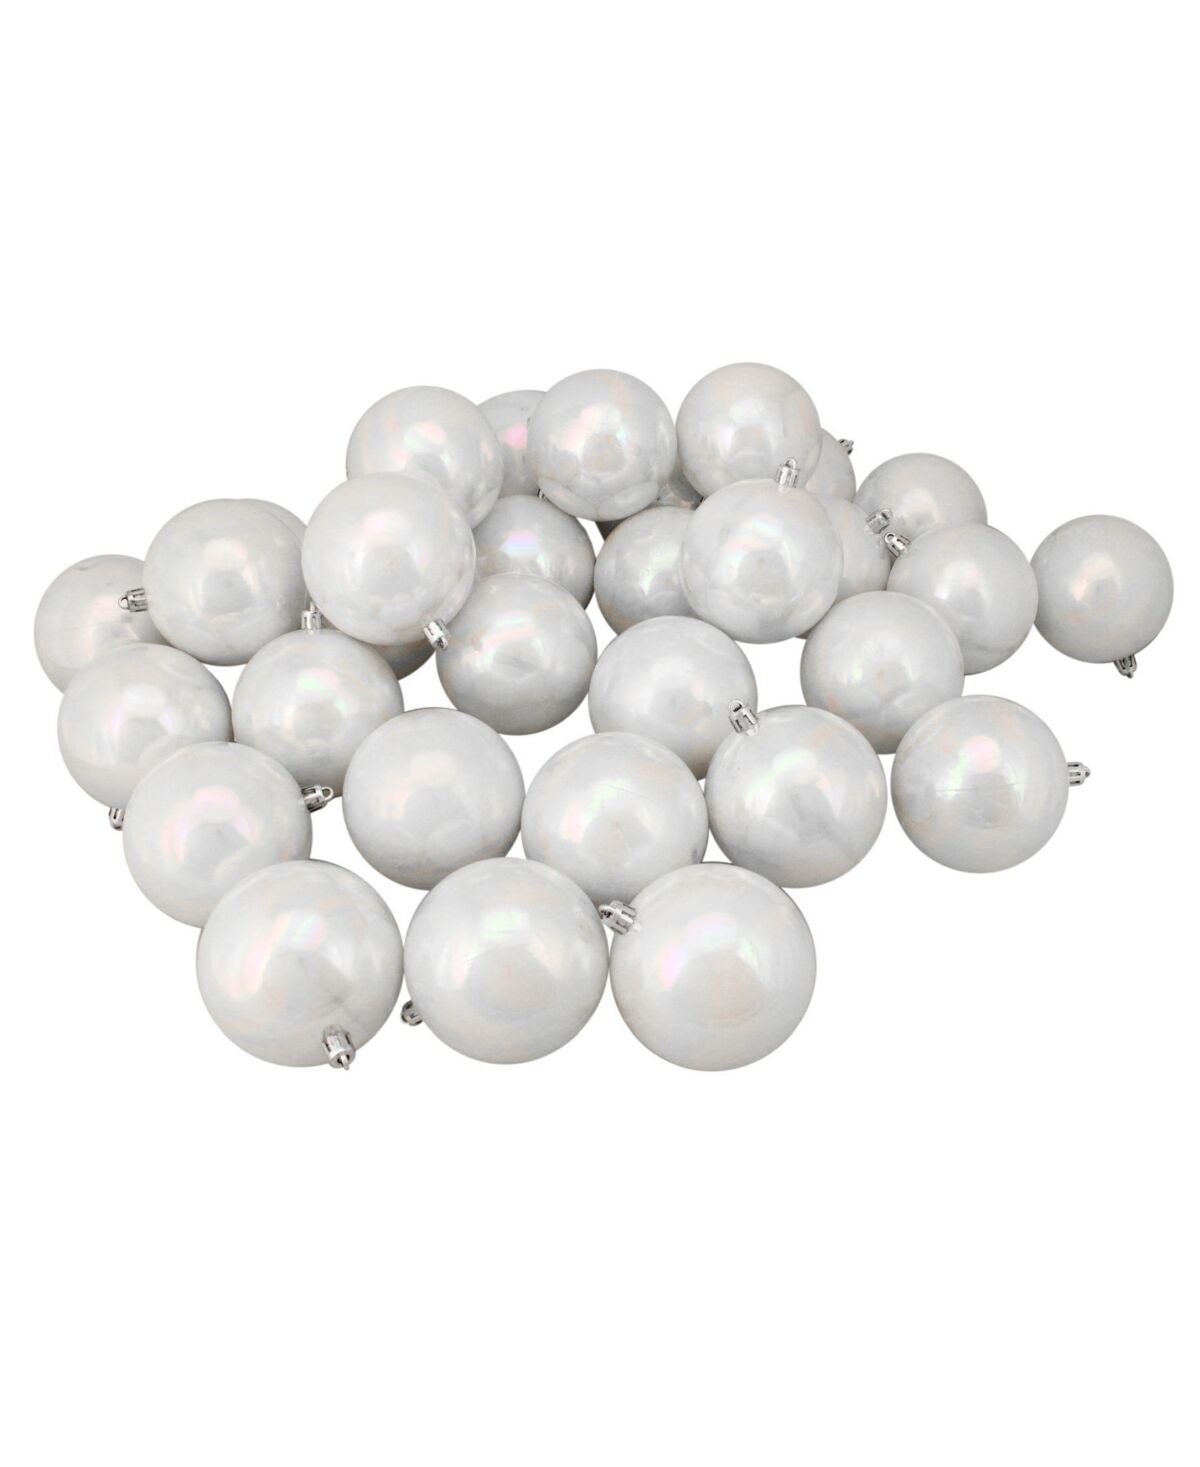 Northlight 32 Count Iridescent Shatterproof Shiny Christmas Ball Ornaments - White